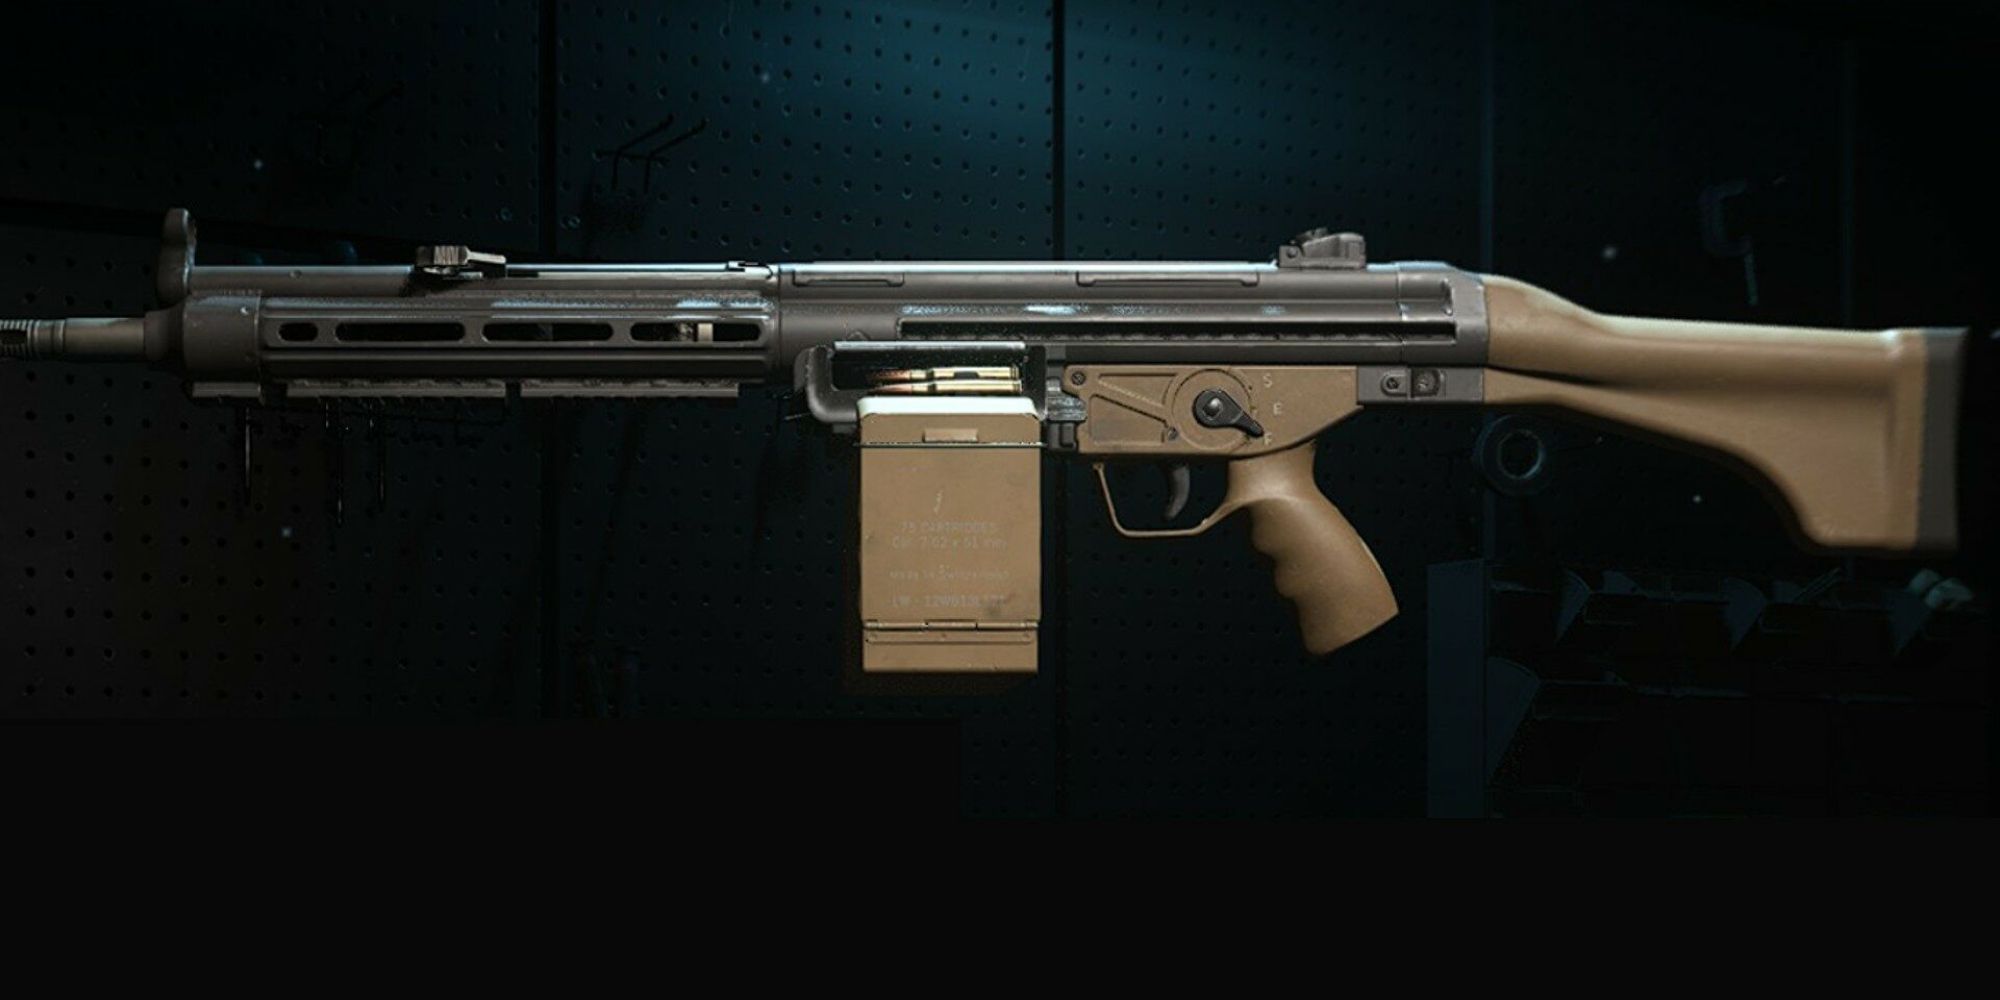 An image of the RAPP-H, an LMG from Modern Warfare 2.